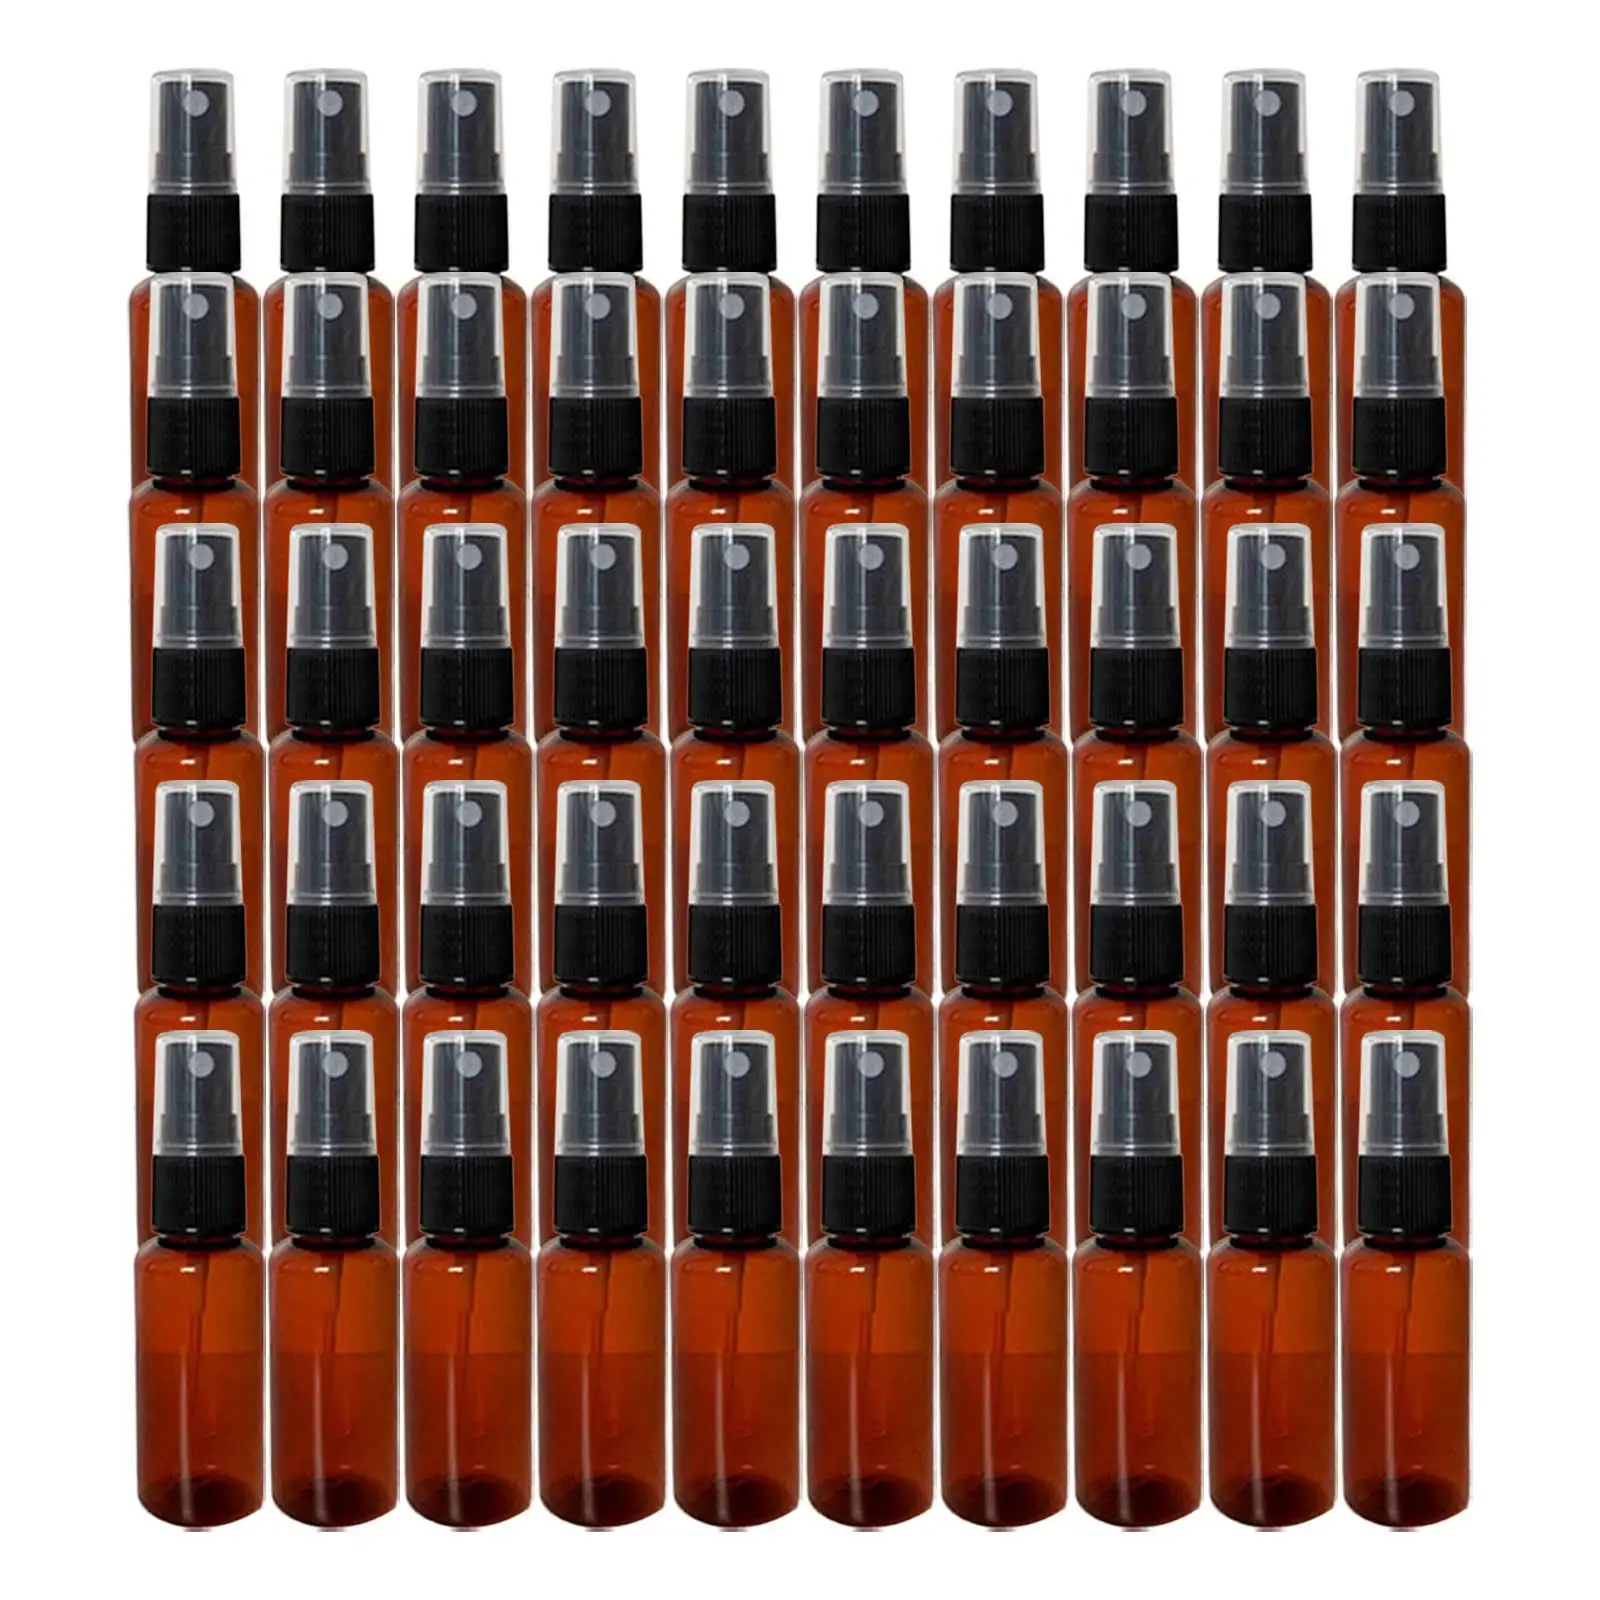 50x Spray Bottle Lightweight Portable 30ml Makeup Sprayer Fine Mist Household Mini Cosmetic Bottle Refillable with Cover Empty